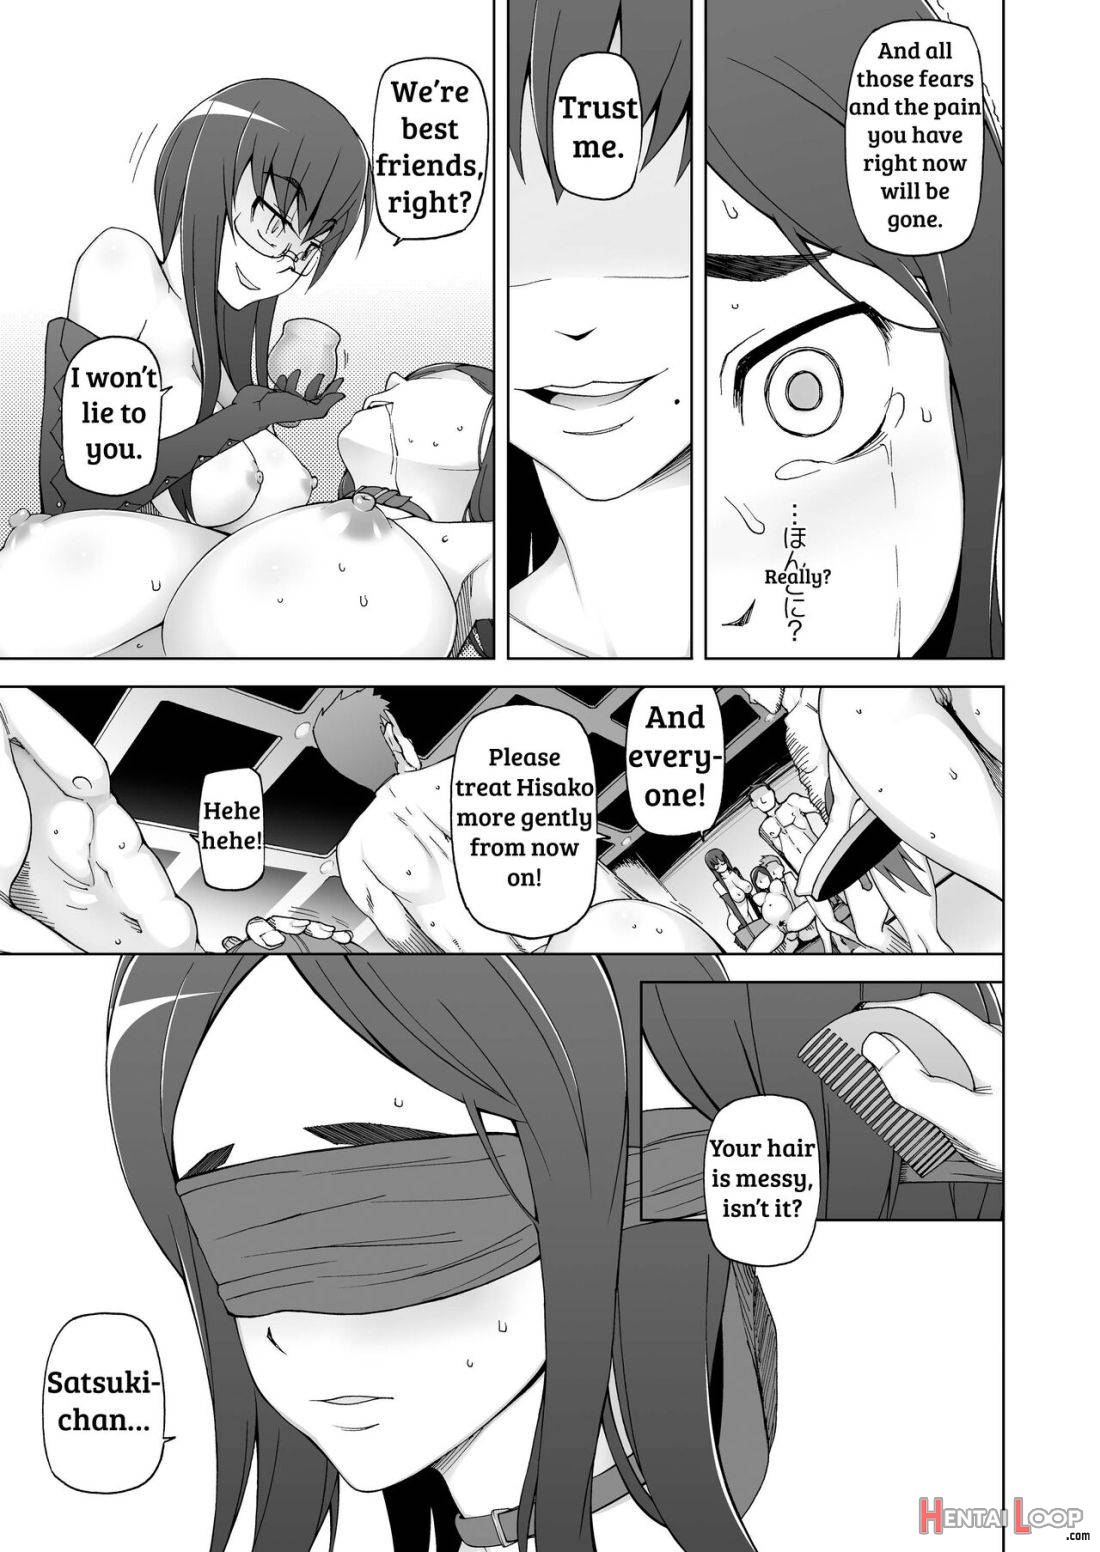 Jusei Ganbou page 84